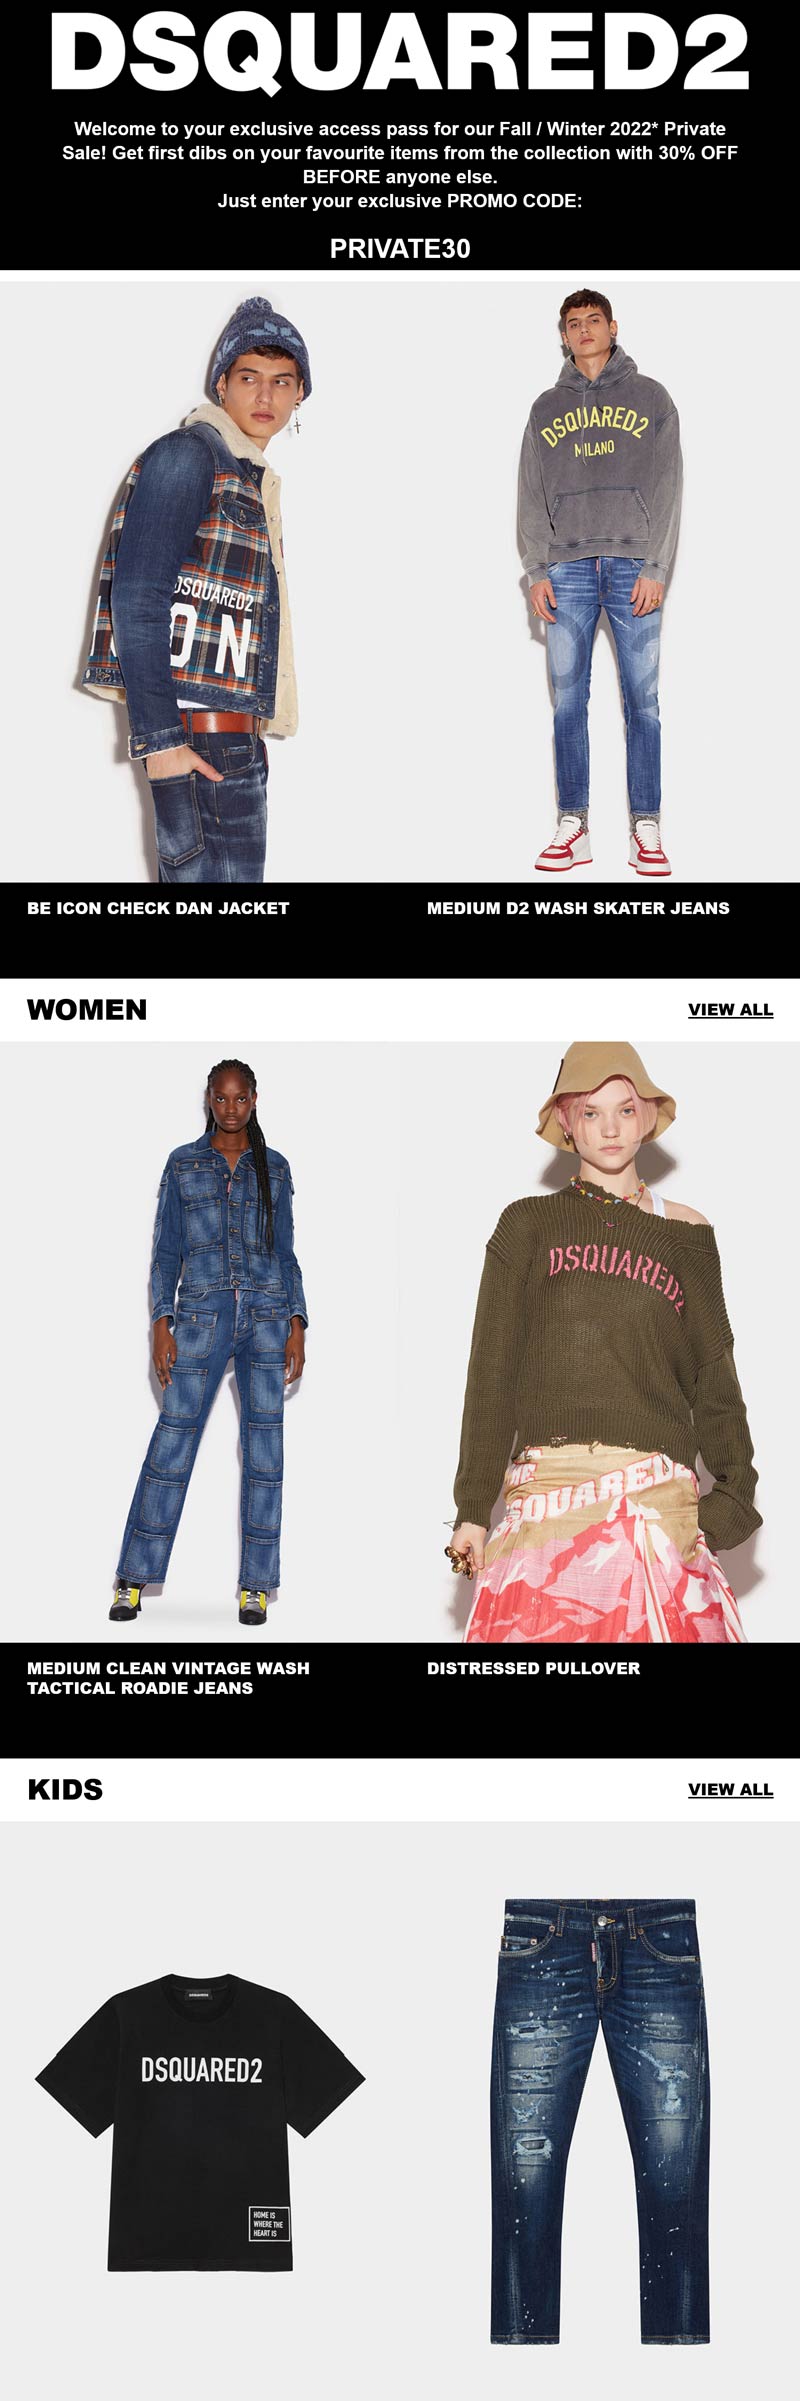 DSQUARED2 coupons & promo code for [November 2022]